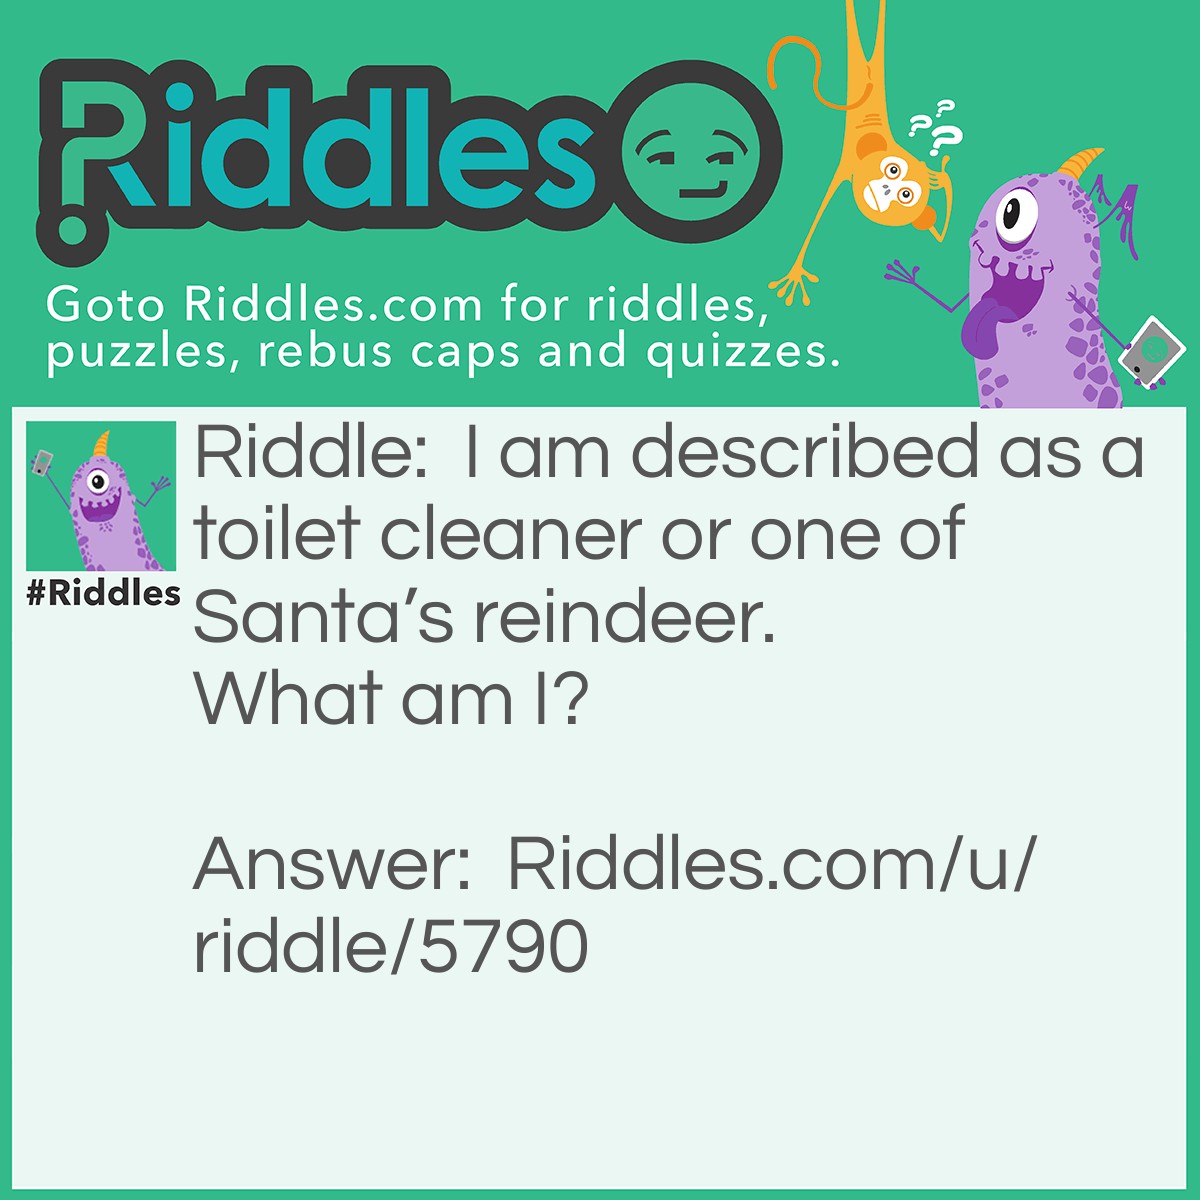 Riddle: I am described as a toilet cleaner or one of Santa's reindeer. What am I? Answer: I’m a comet!